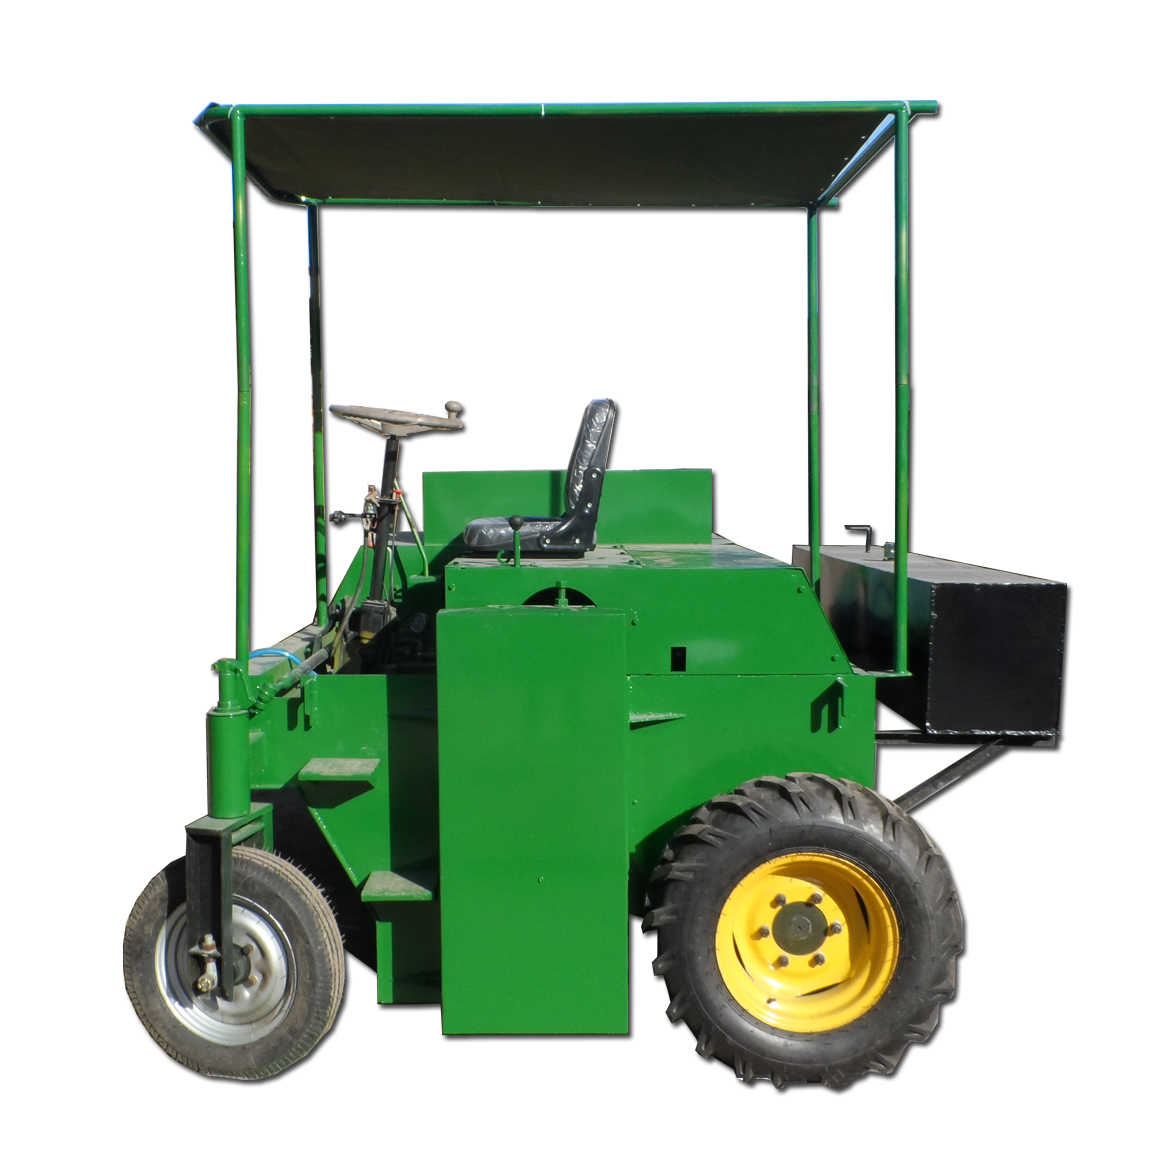 Bottom price Donkey Manure Compost Mixer - Cheap compost mixing machine for livestock horse manure compost turner – TAGRM